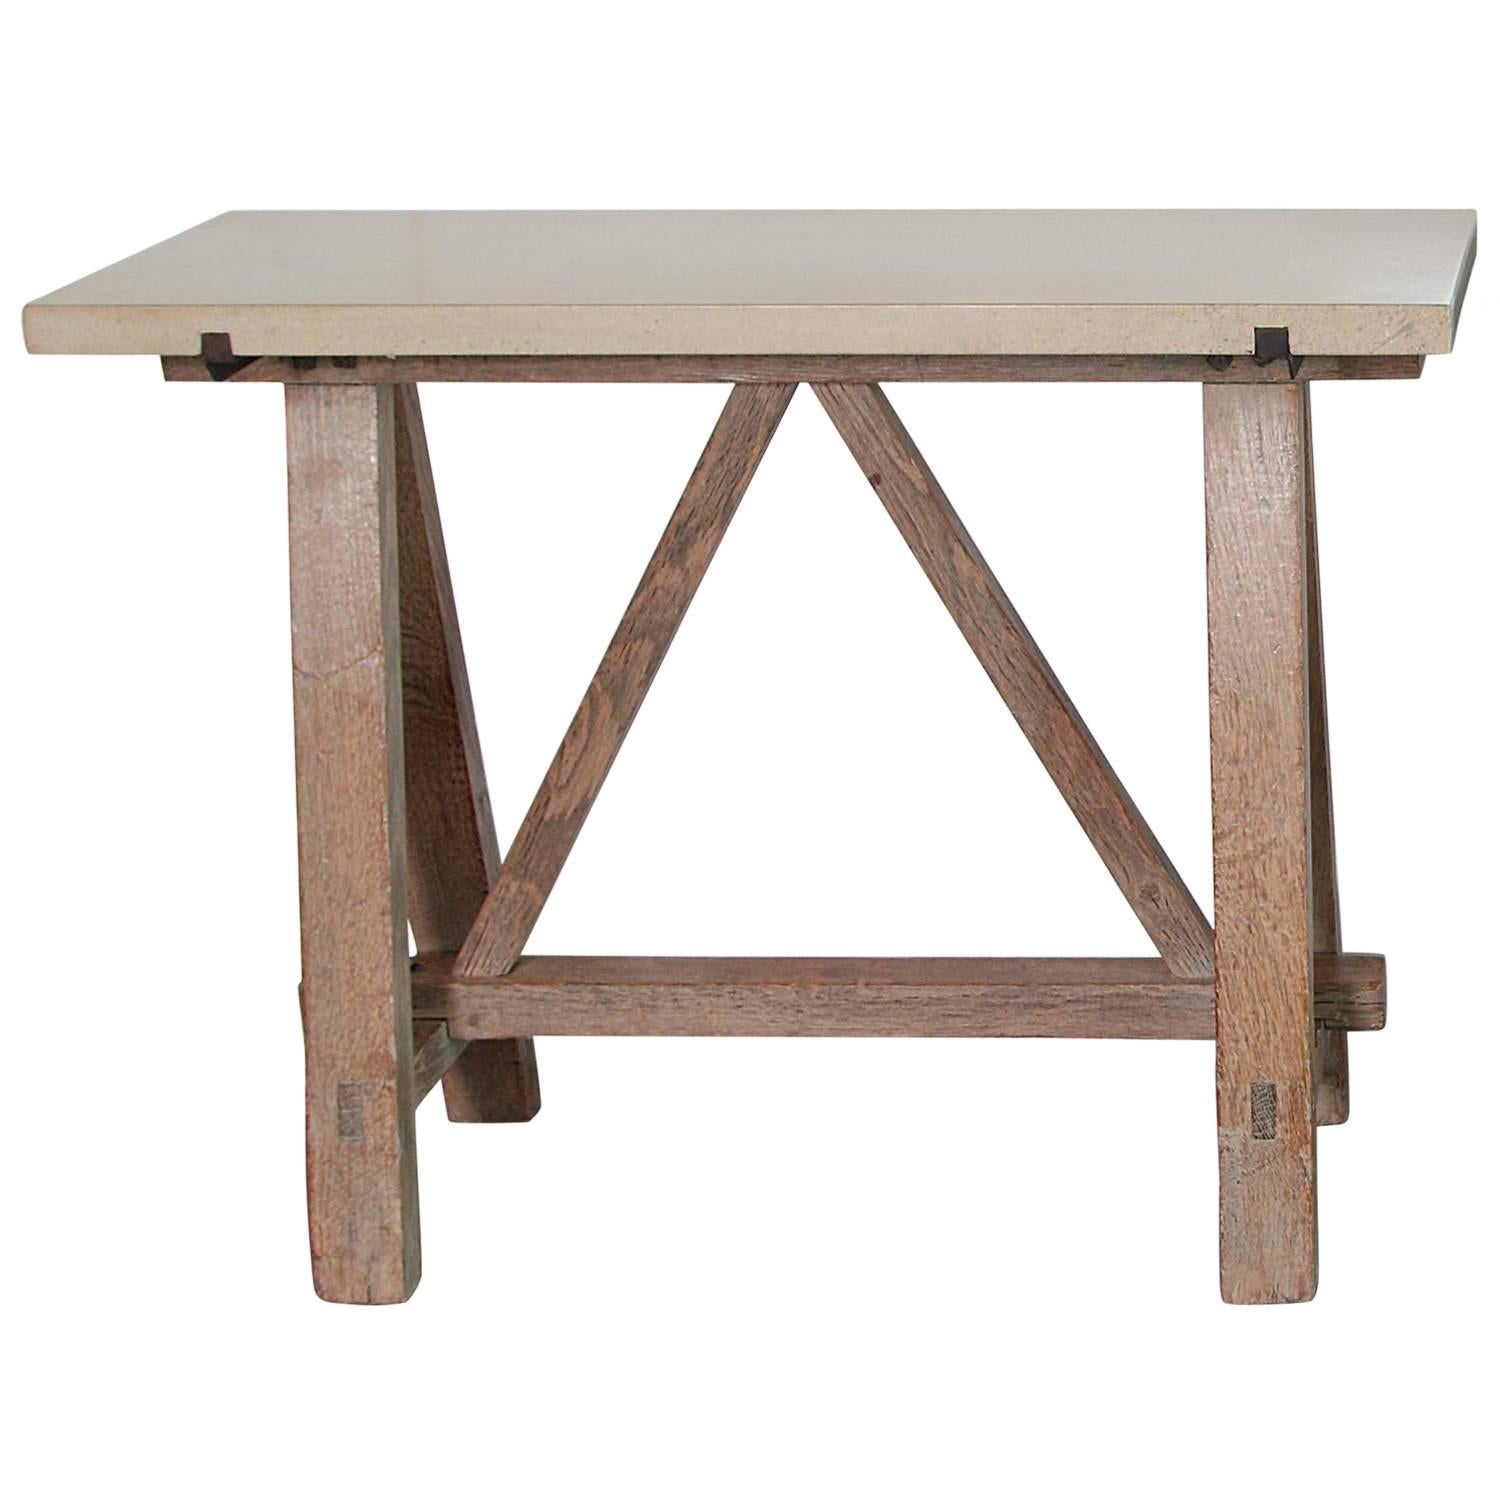 Antique French Blond Oak Saw Horse Entry Tables, circa 1910